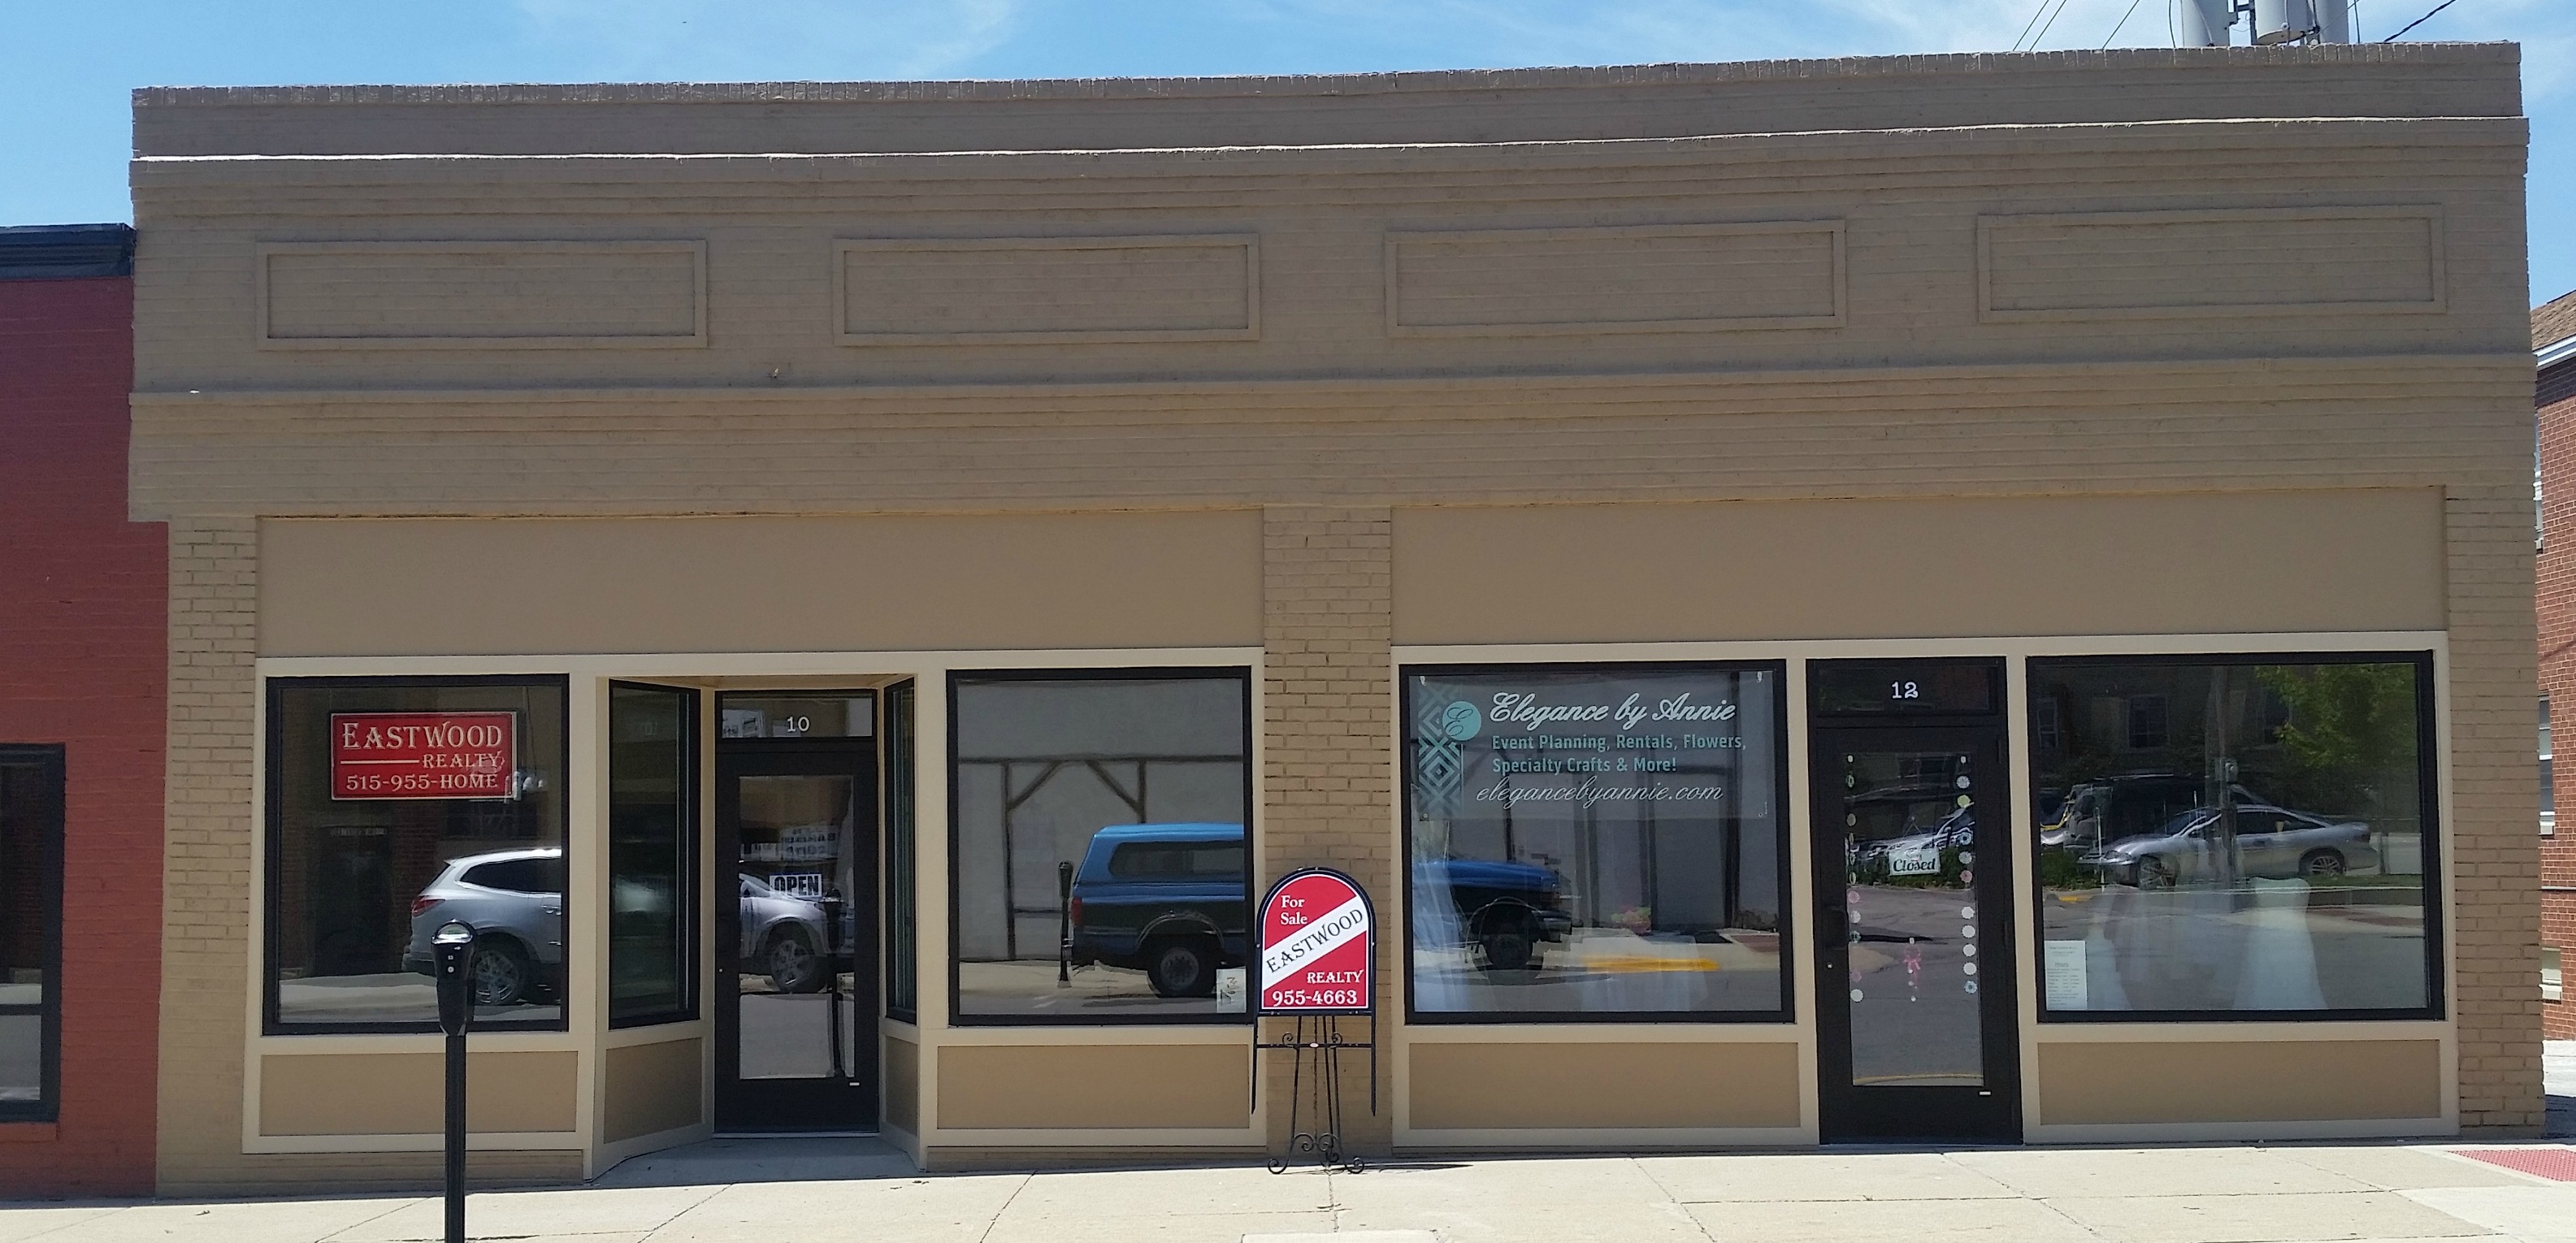 Eastwood Realty is located at 10 North 10th Street in Fort Dodge, Iowa